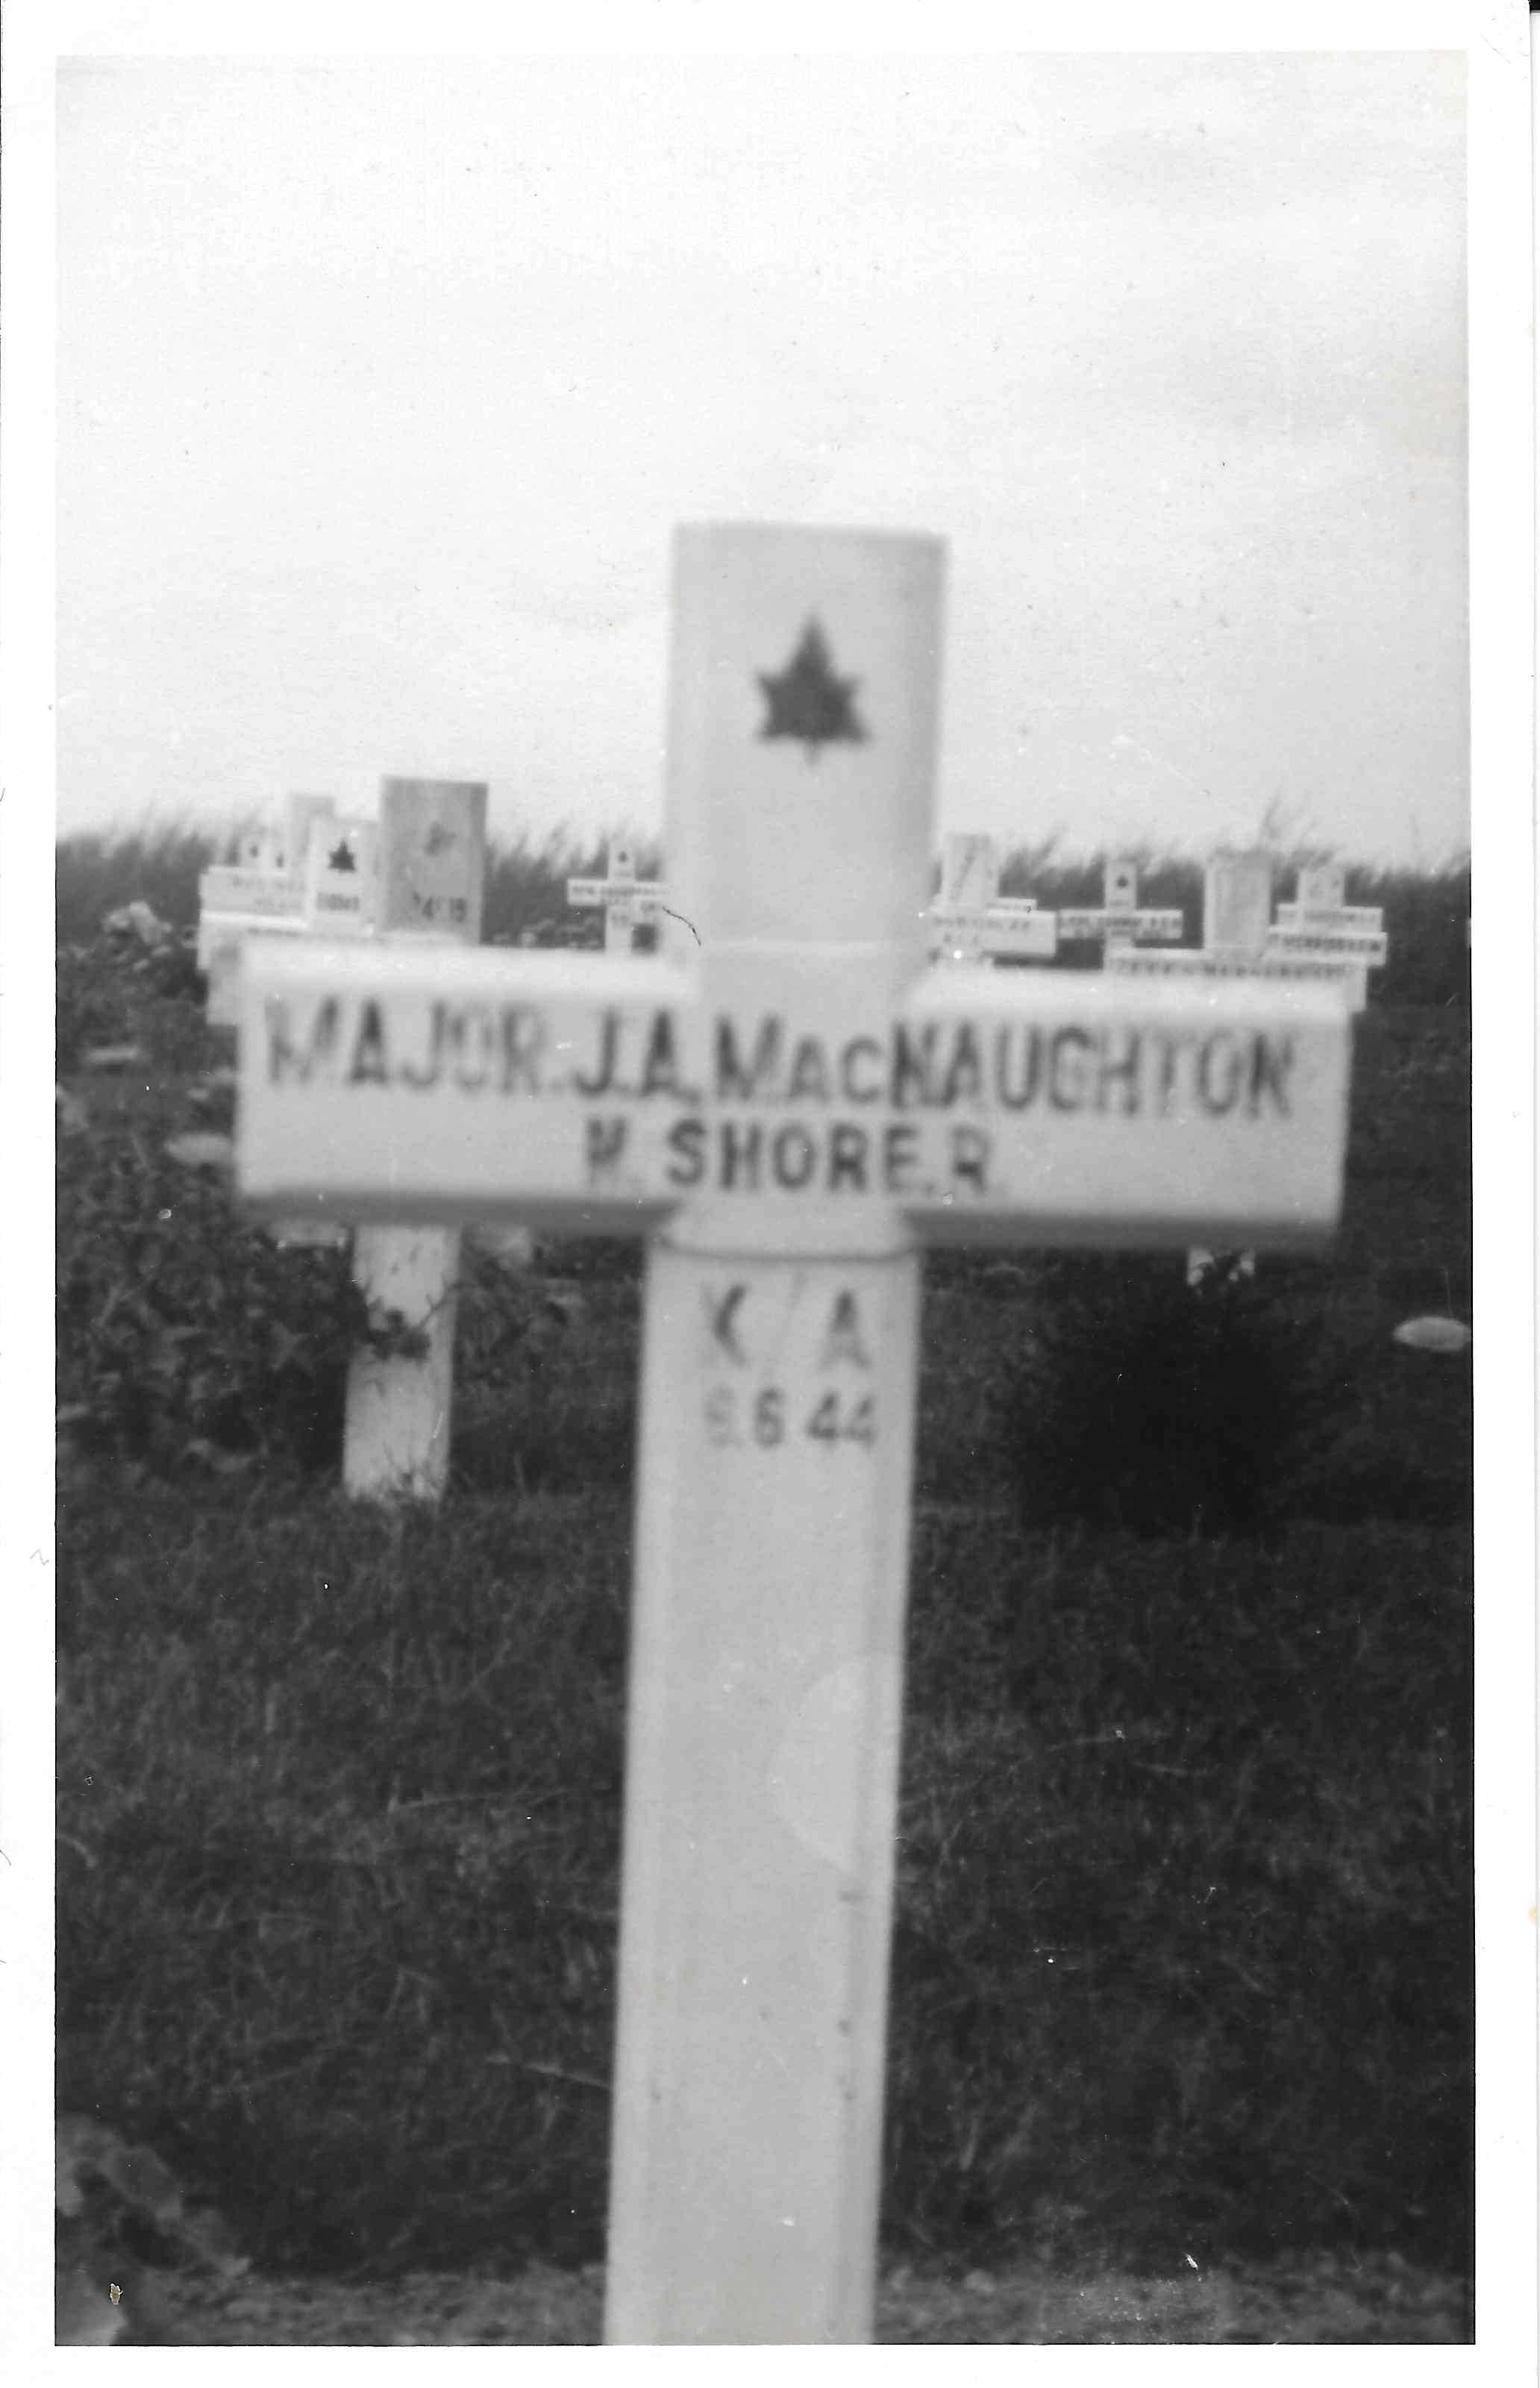 A black and white image shows a white cross grave marker.